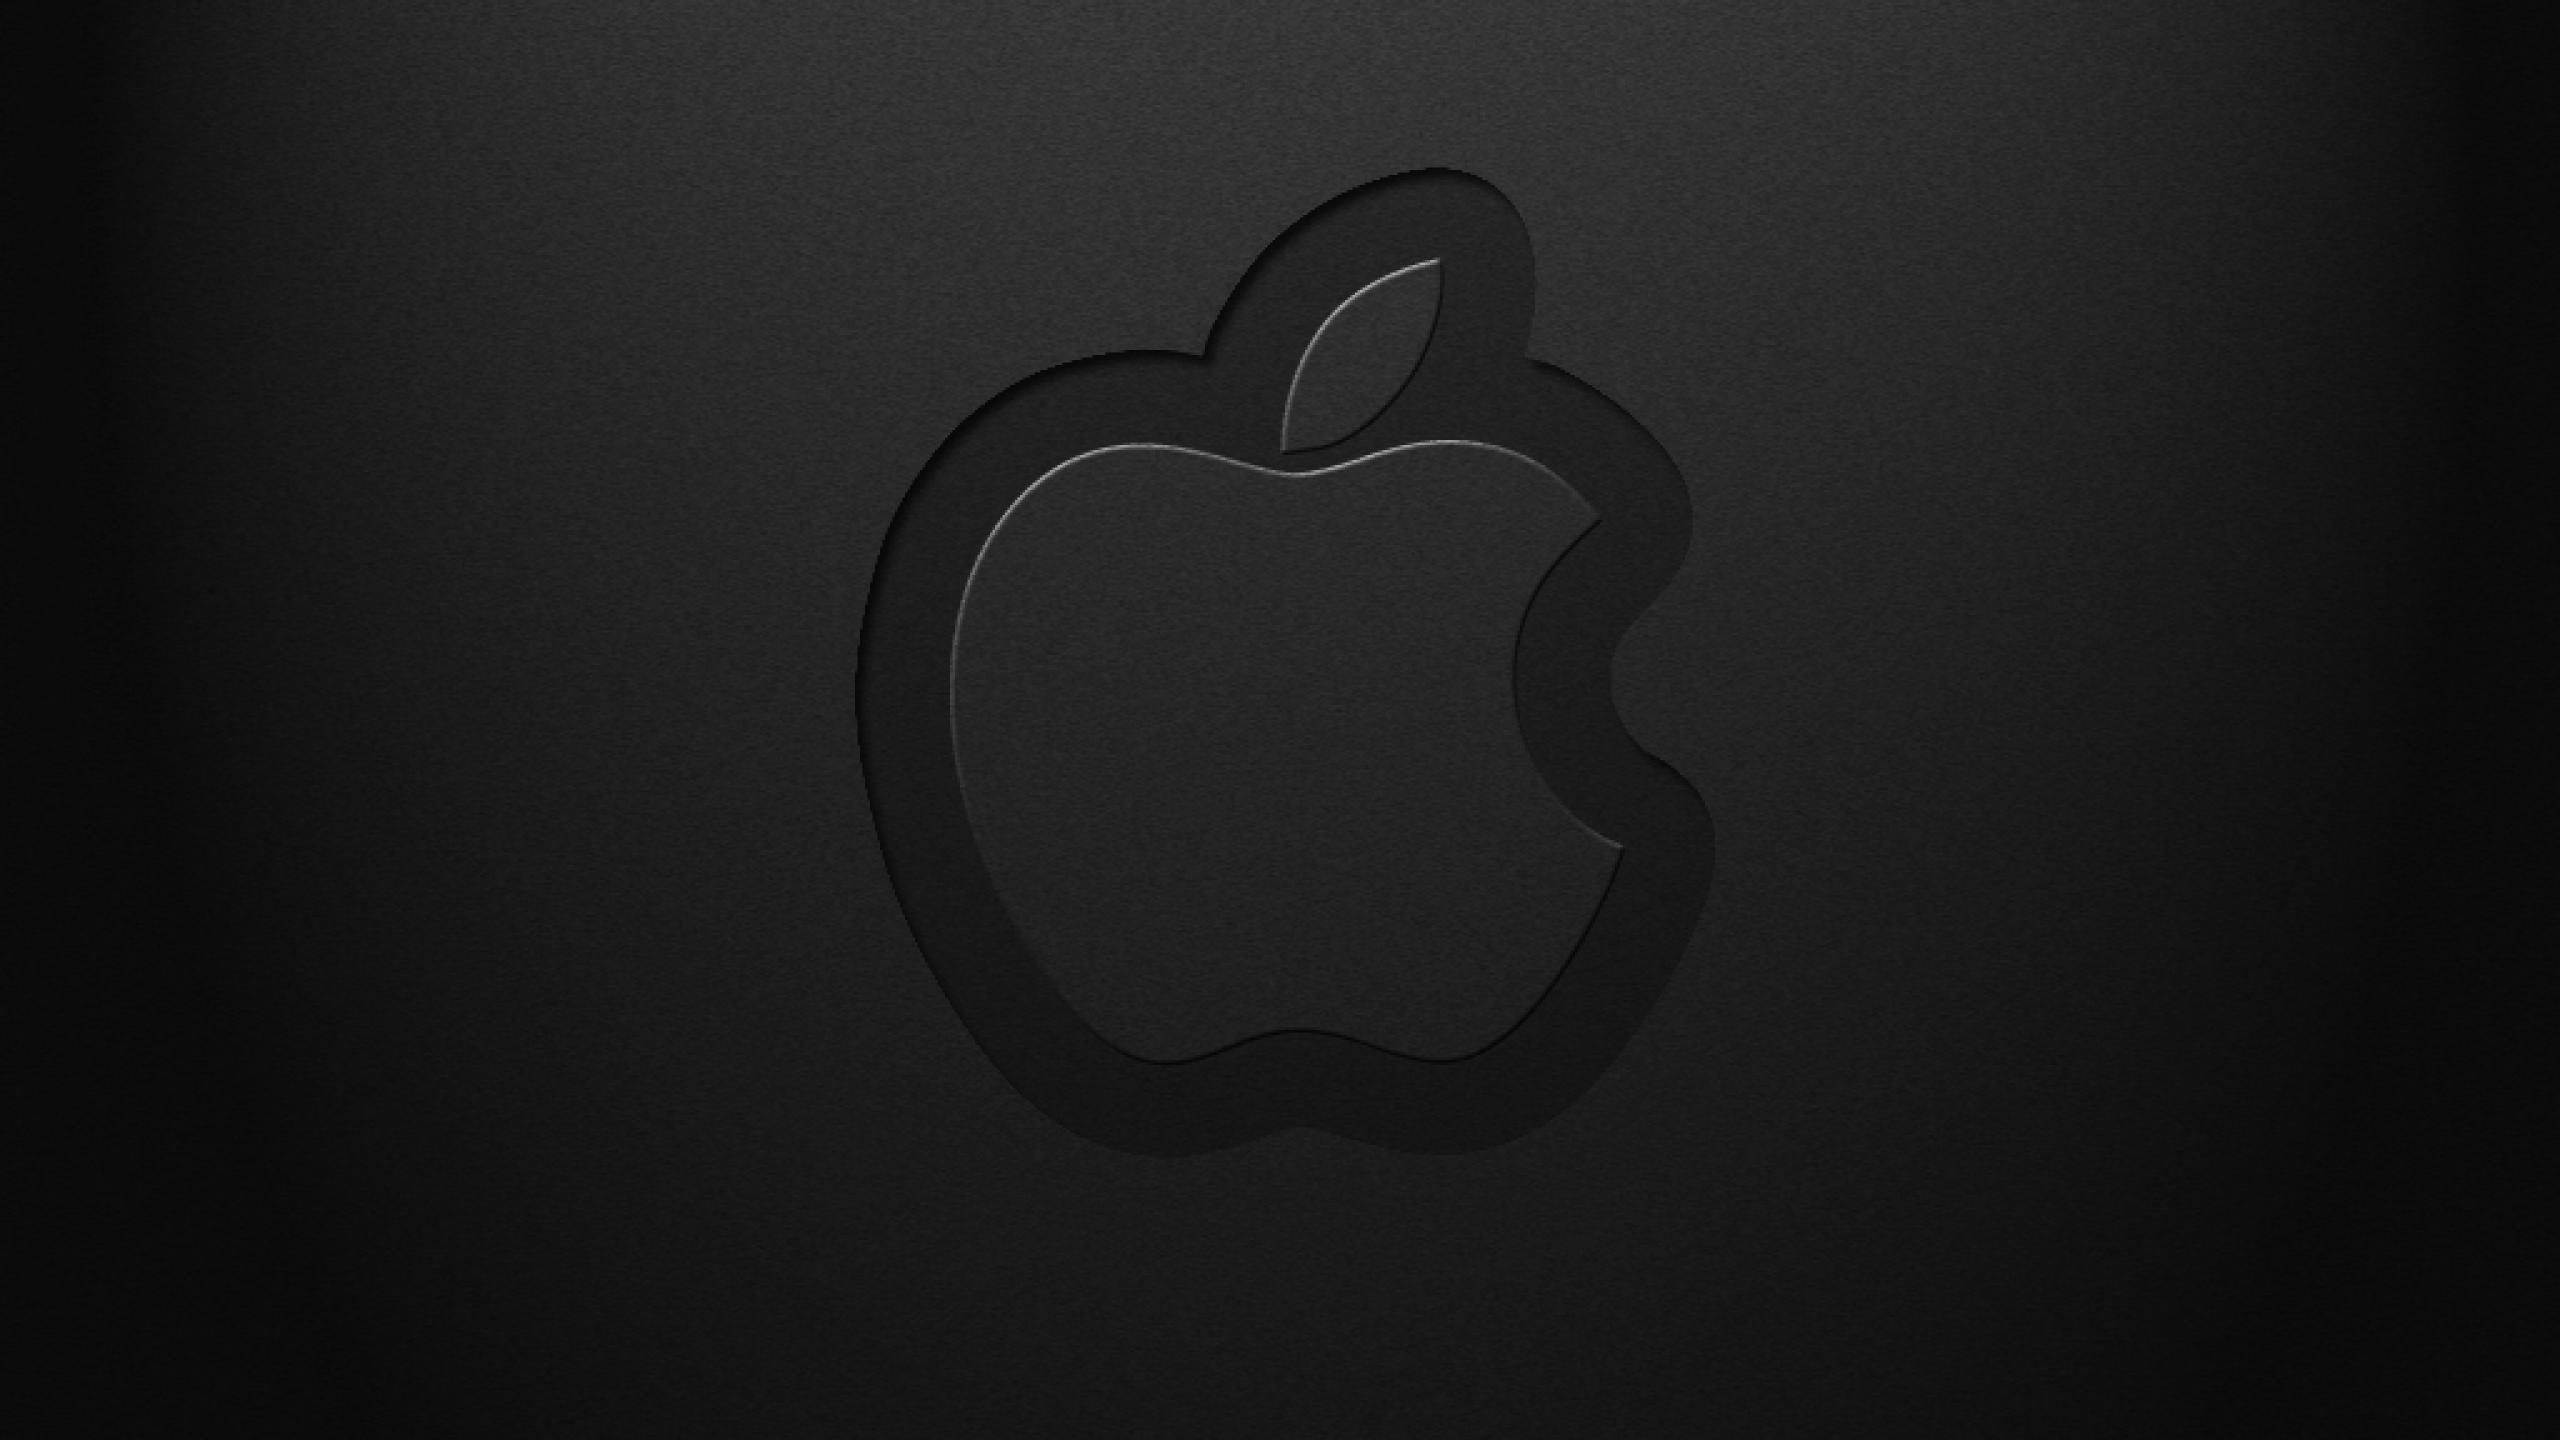 Black Apple Logo Abstract Background – HD Wallpapers Backgrounds Desktop, iphone & Android Free Download